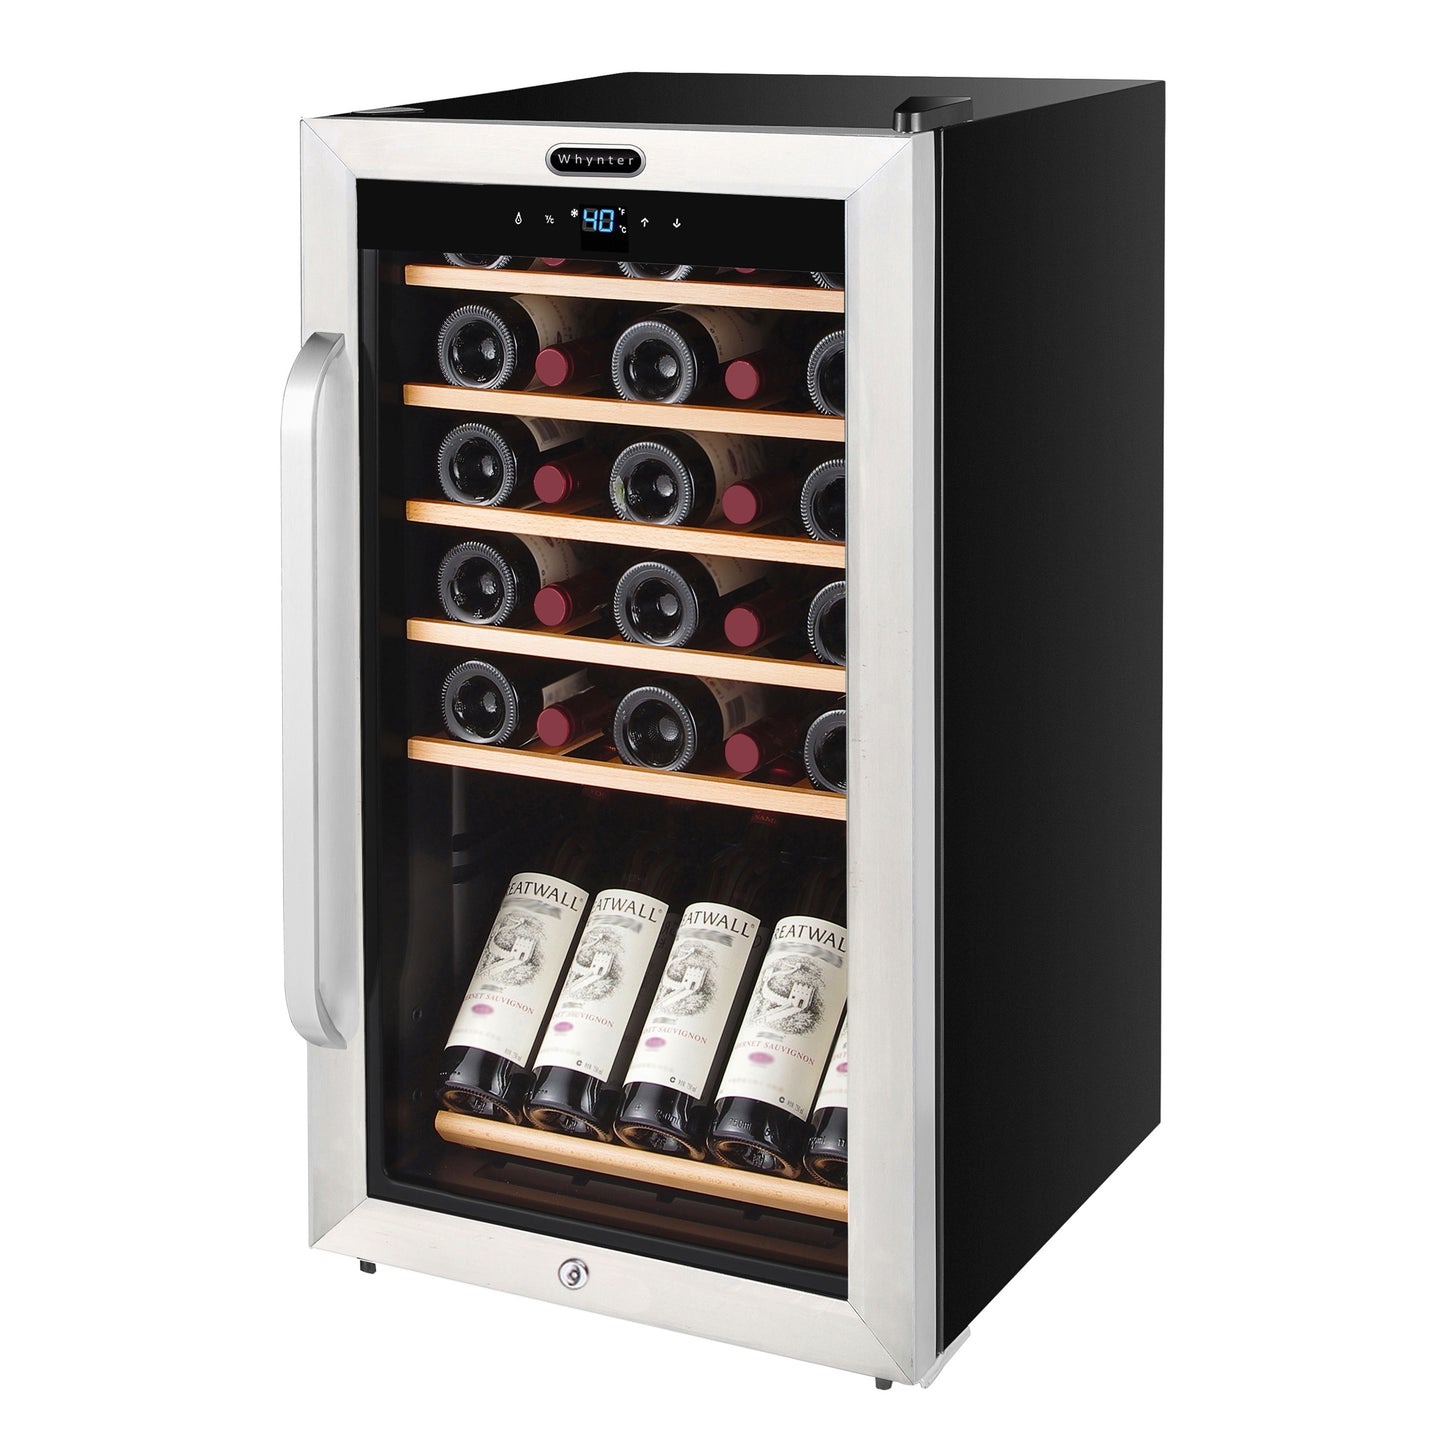 A stainless steel wine fridge with 166-bottle capacity and LED lights, showcasing bottles on adjustable shelves and a wire display rack.